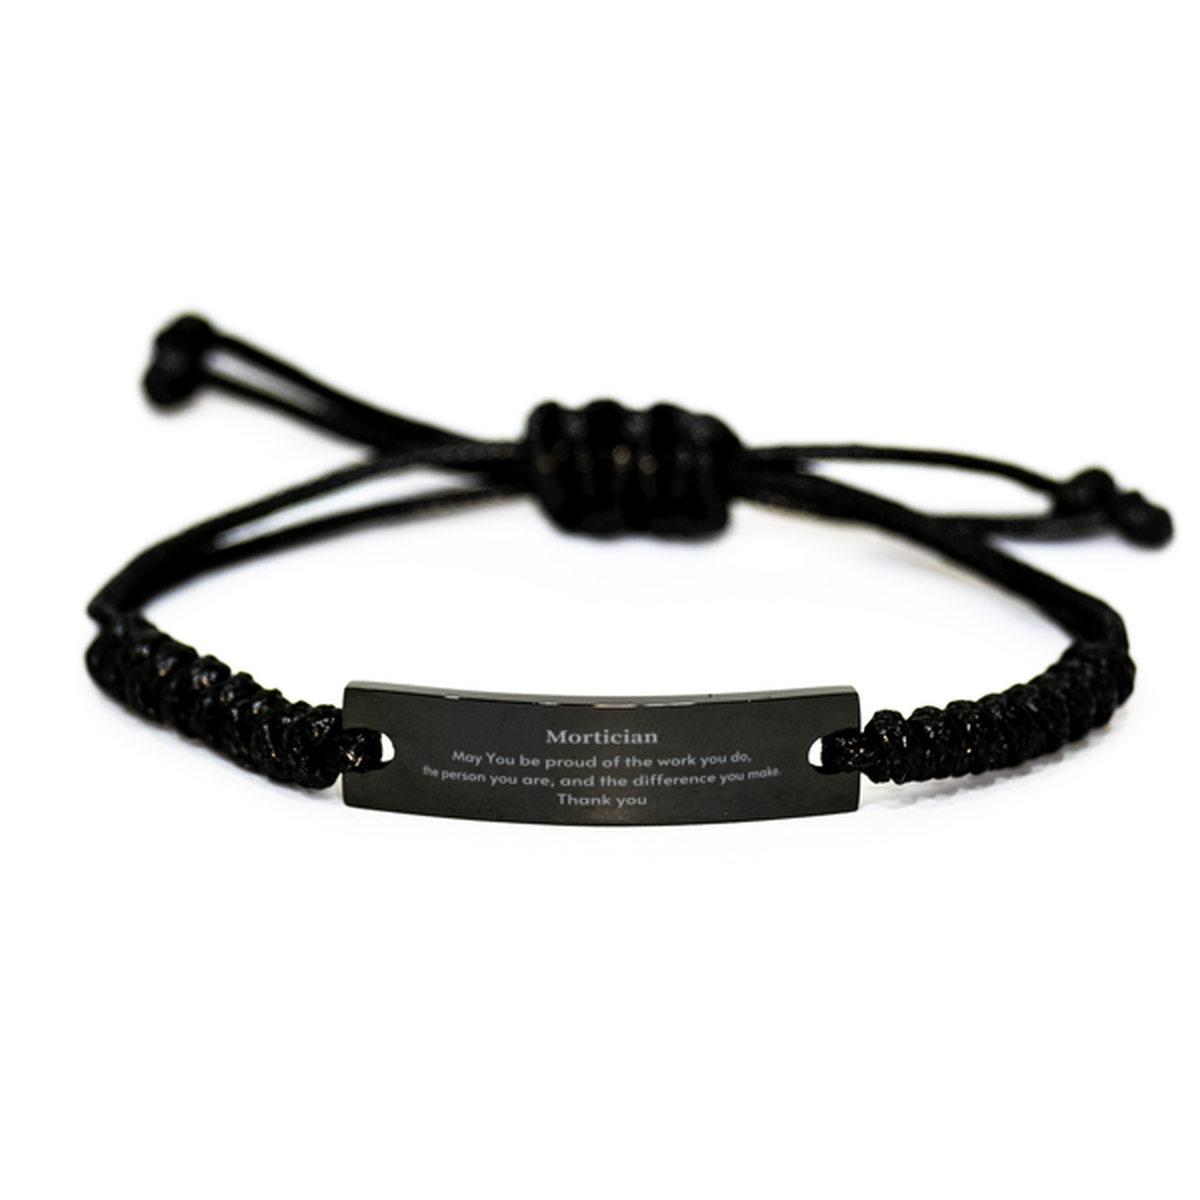 Heartwarming Black Rope Bracelet Retirement Coworkers Gifts for Mortician, Mortician May You be proud of the work you do, the person you are Gifts for Boss Men Women Friends